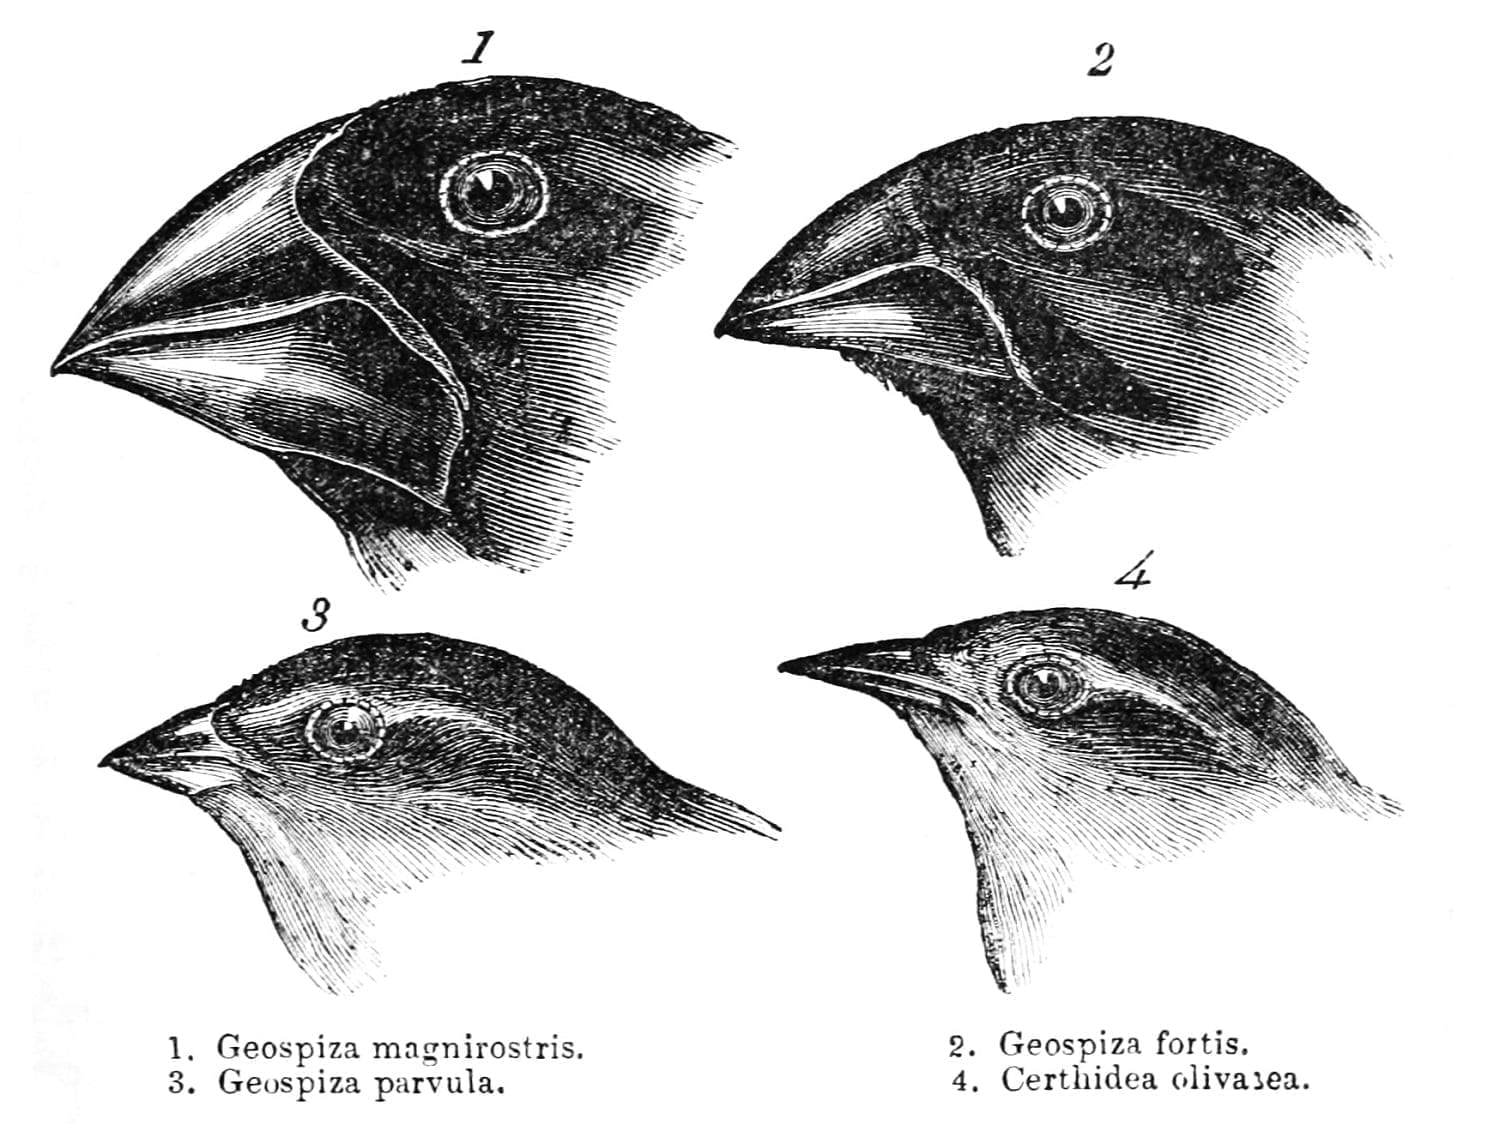 Engraving of Darwin's Finches from "Voyage of the Beagle" 1845